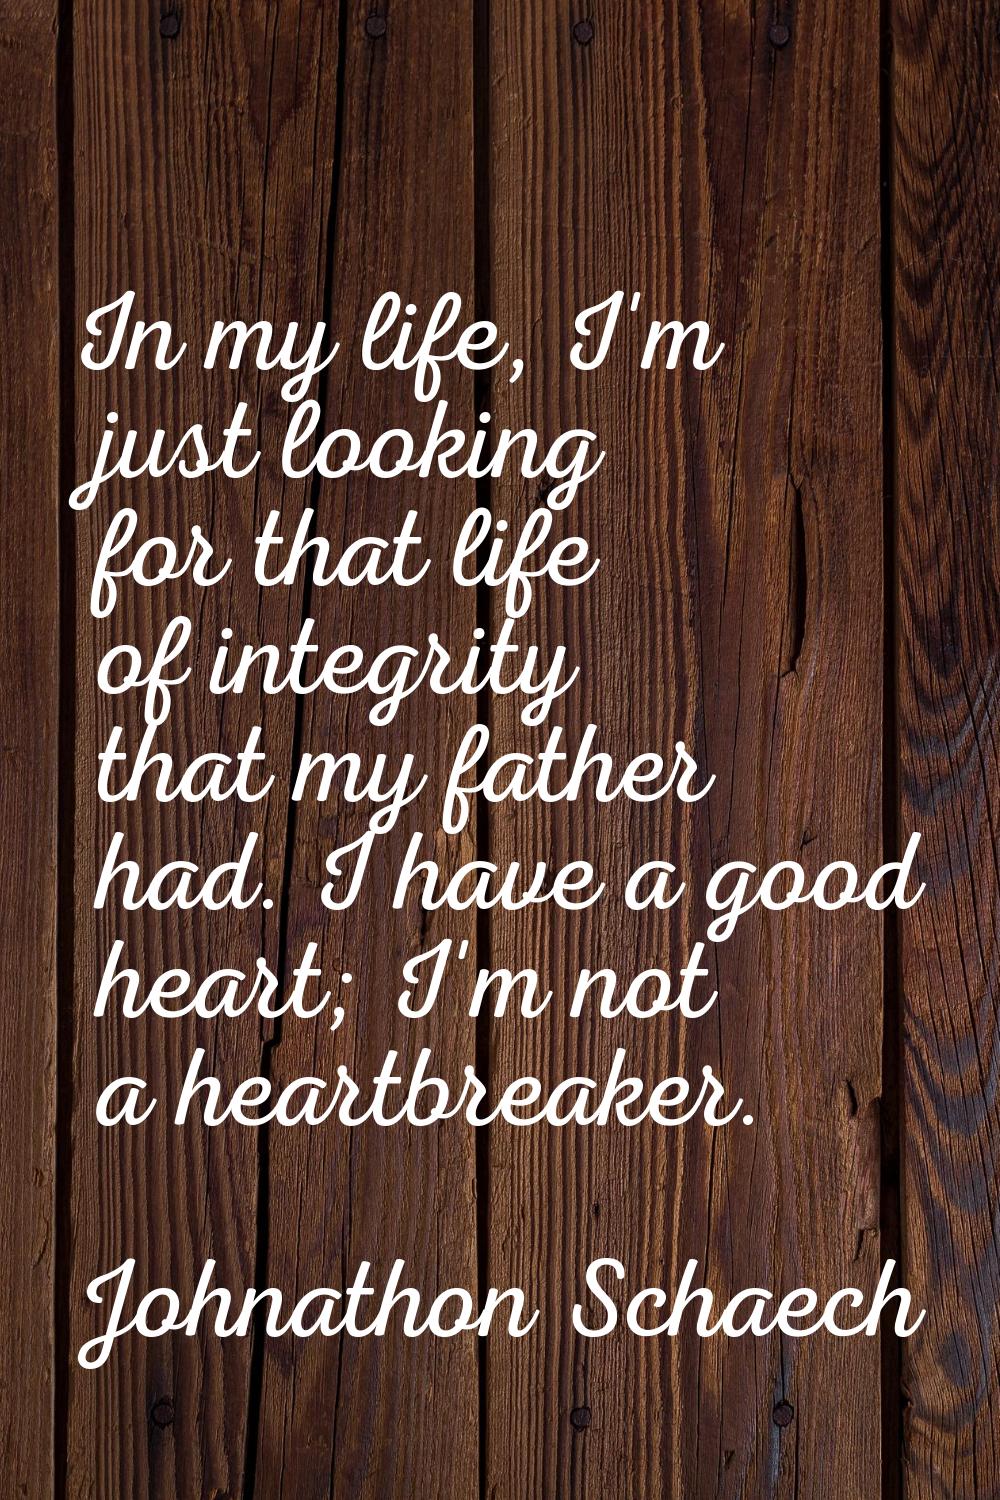 In my life, I'm just looking for that life of integrity that my father had. I have a good heart; I'